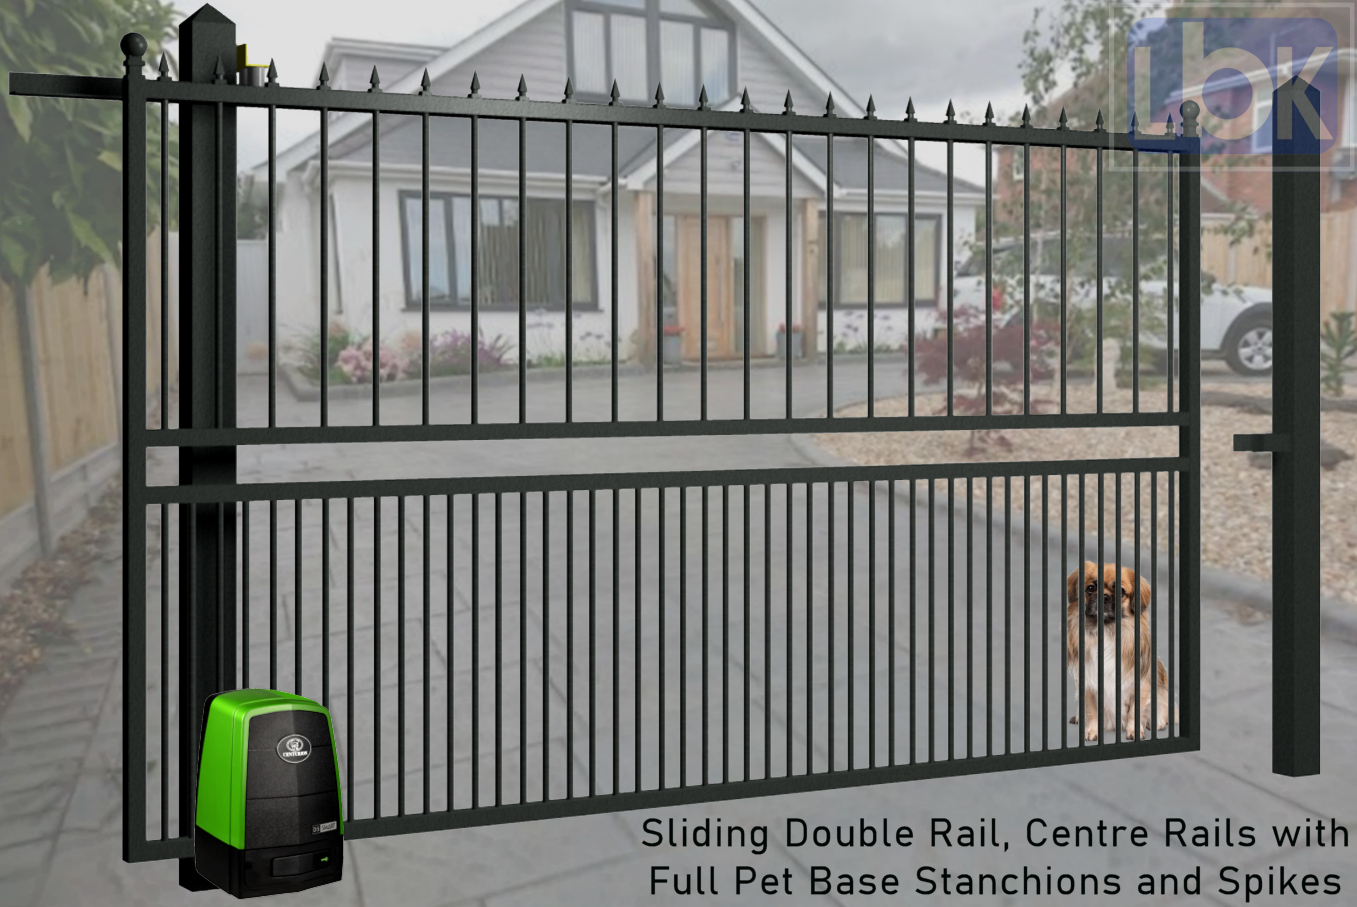 02e Sliding Double Rail, Centre Rails with Full Pet Base Stanchions and Spikes